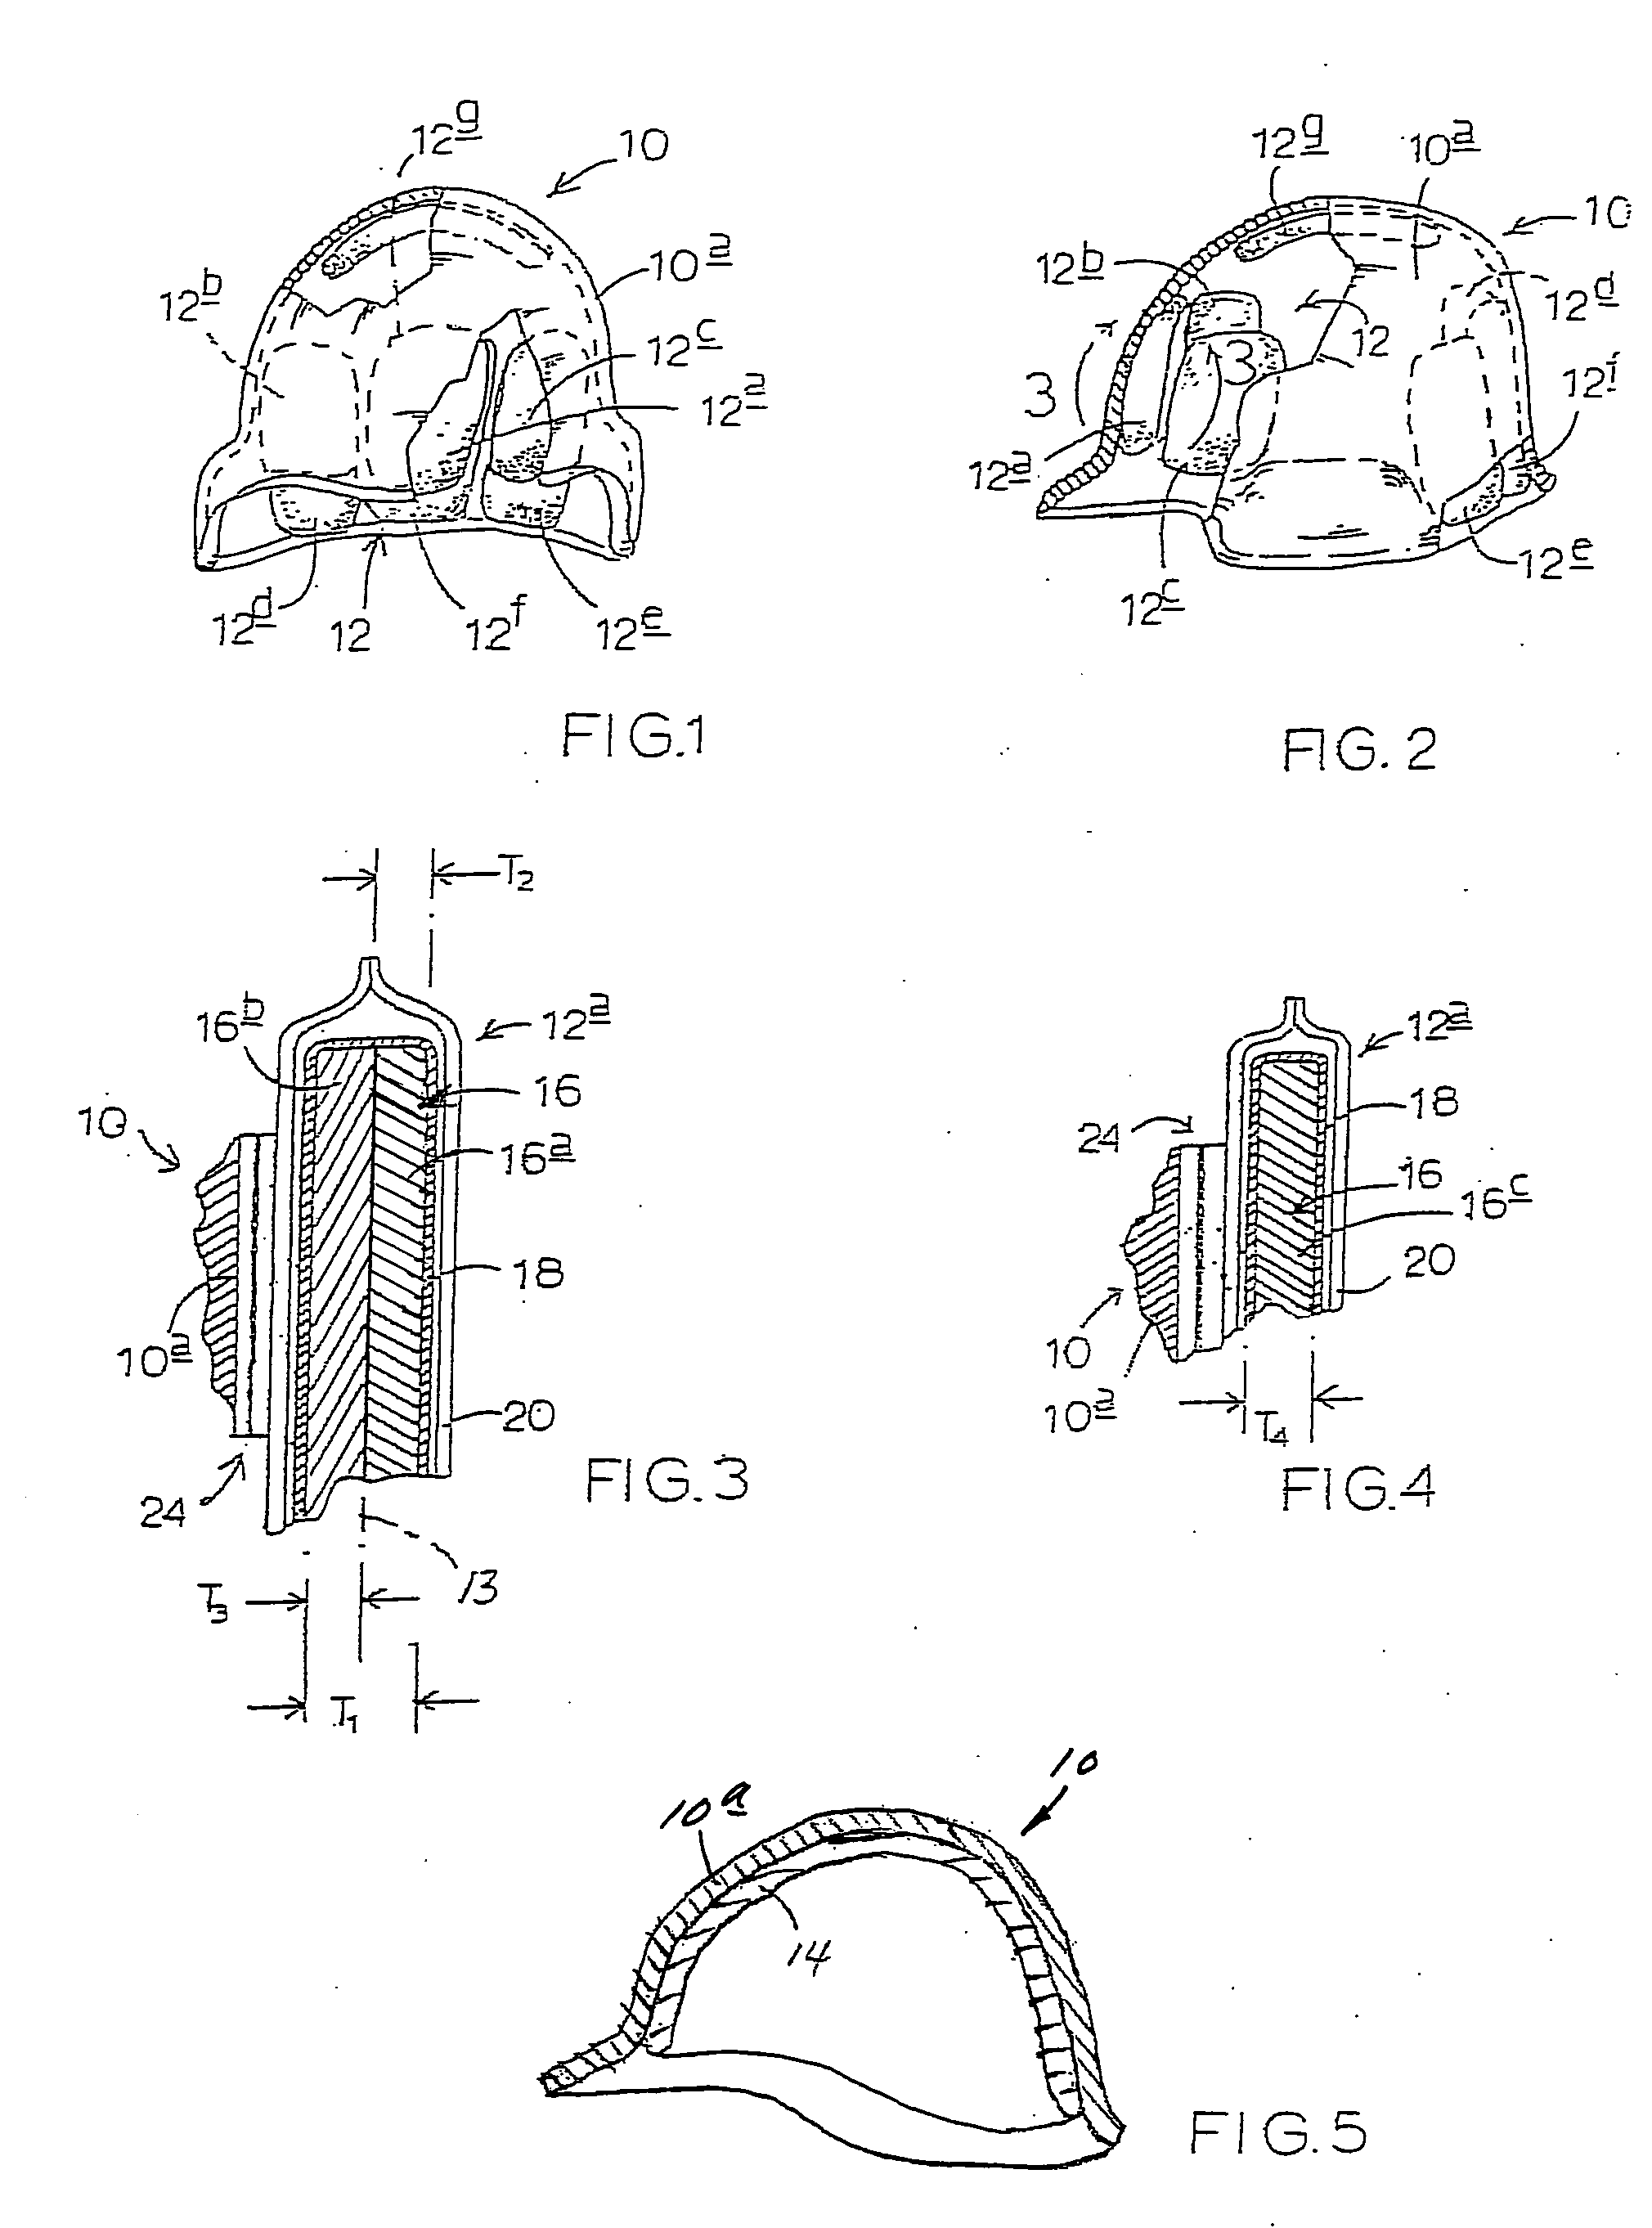 Non-resiliency body-contact protective helmet interface structure